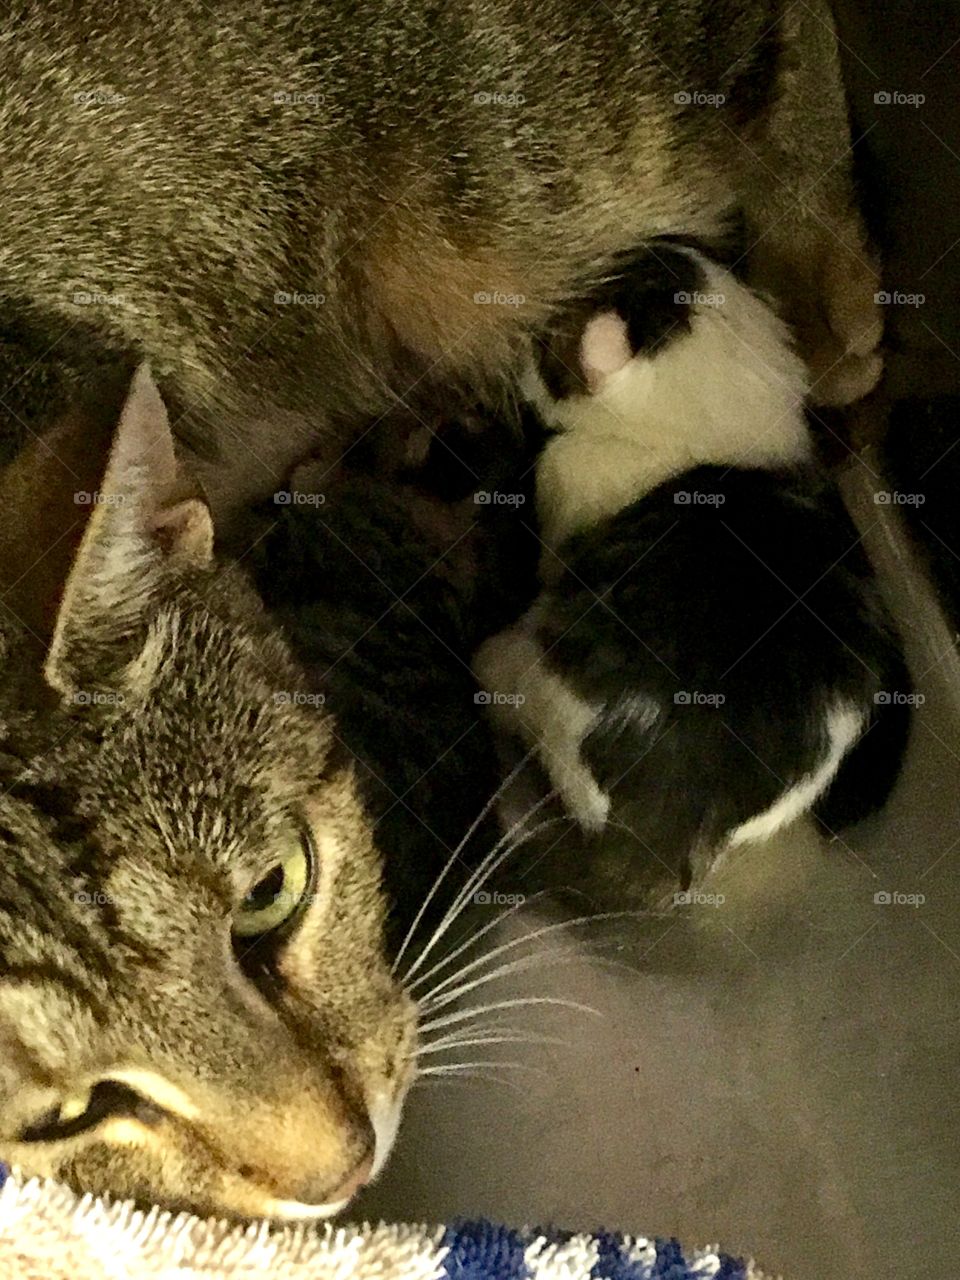 Mom cat safe inside caring for her two newborn kittens.